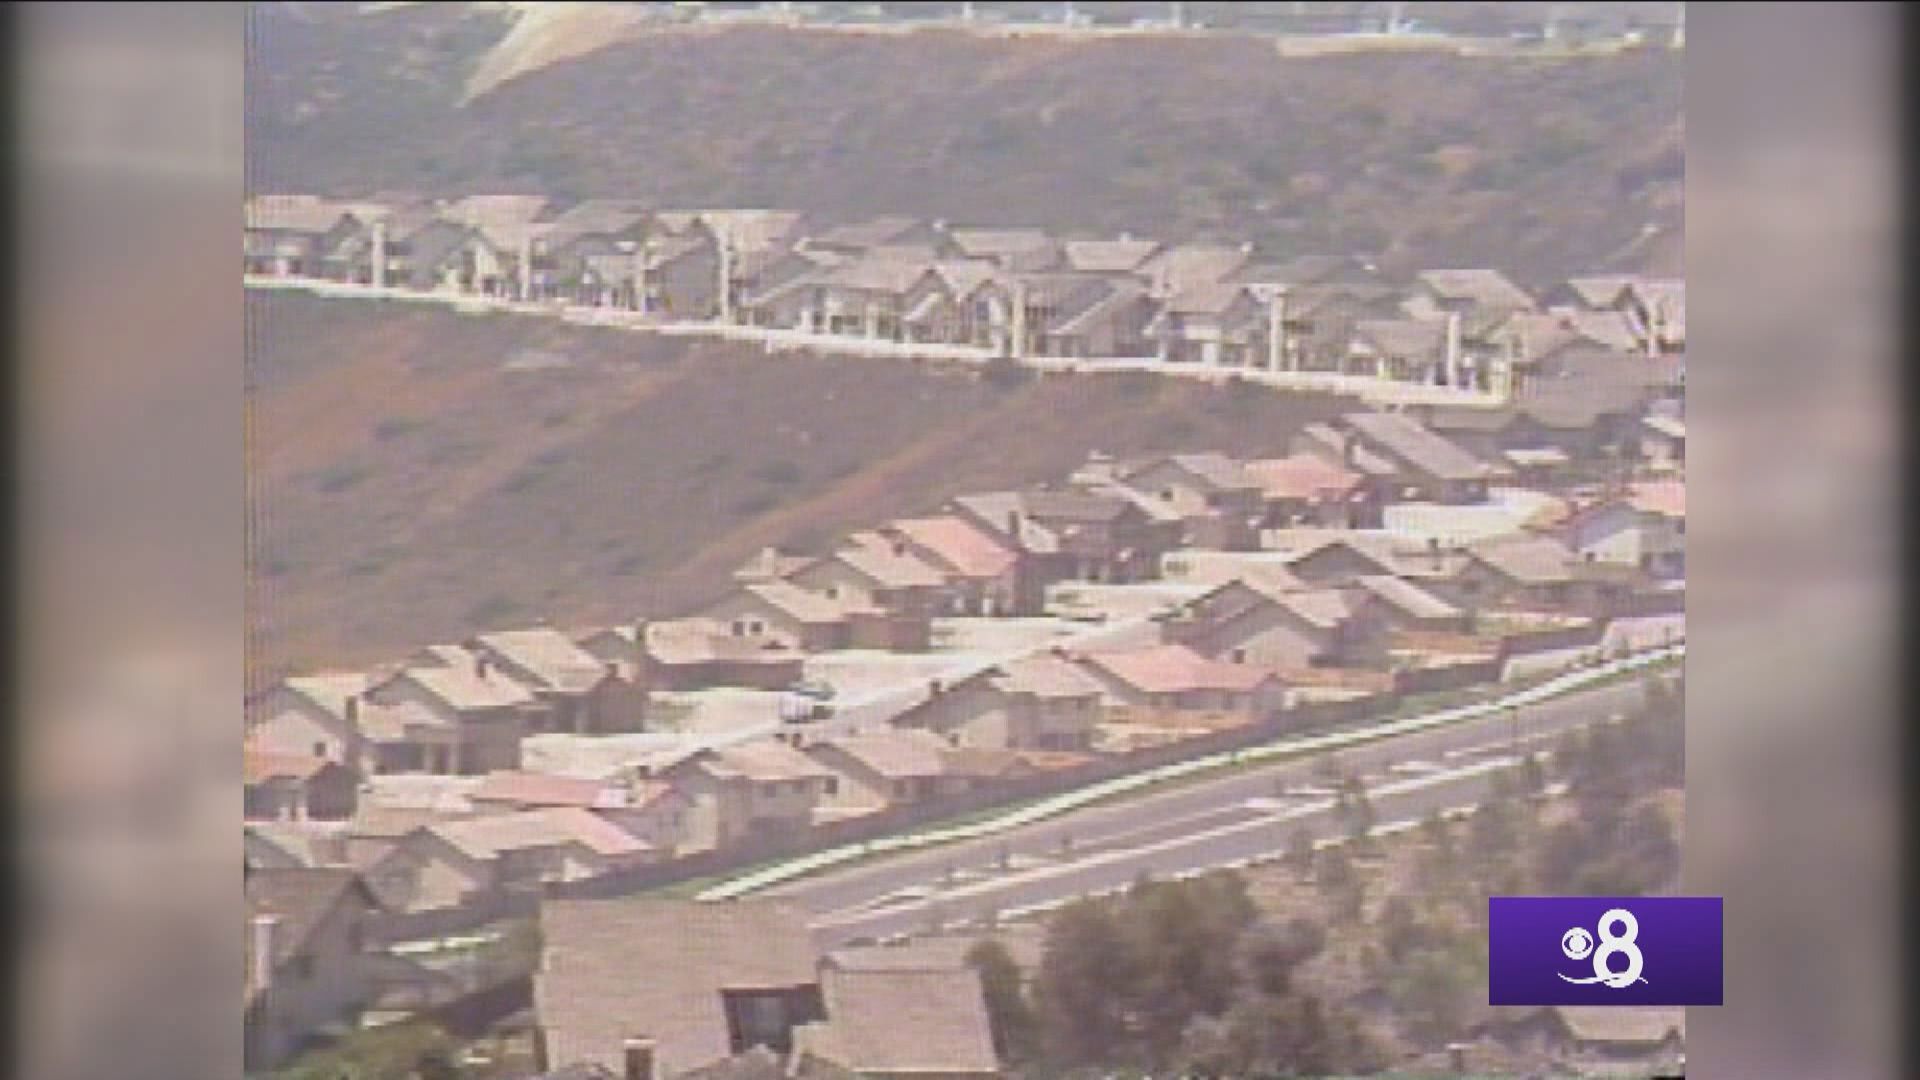 A look at the housing market in San Diego in the late 1970s.